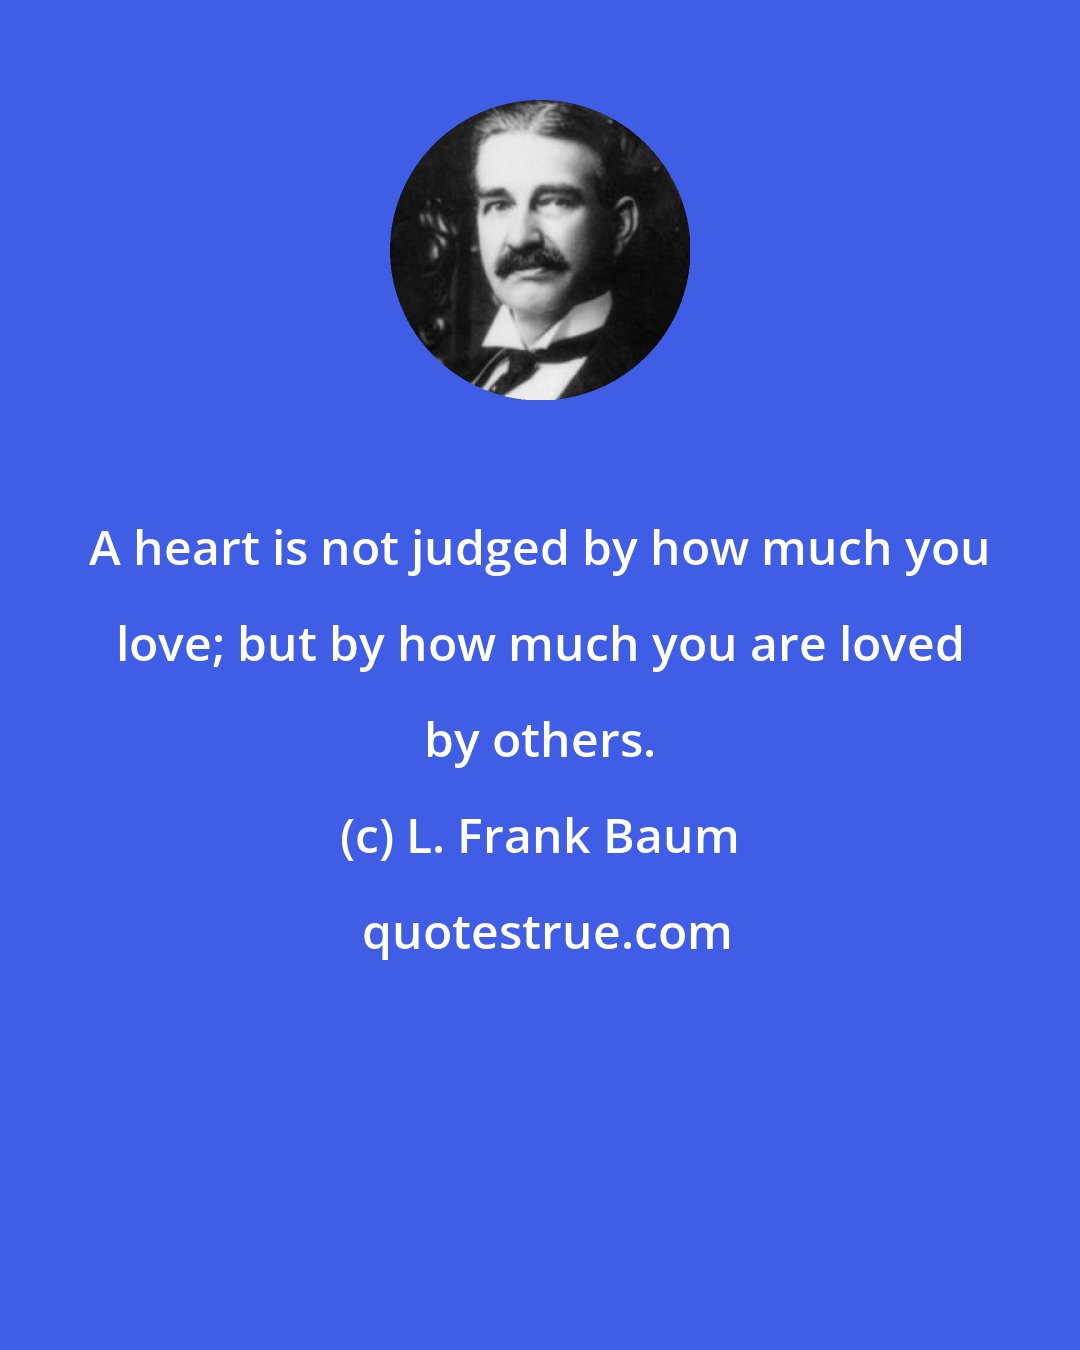 L. Frank Baum: A heart is not judged by how much you love; but by how much you are loved by others.